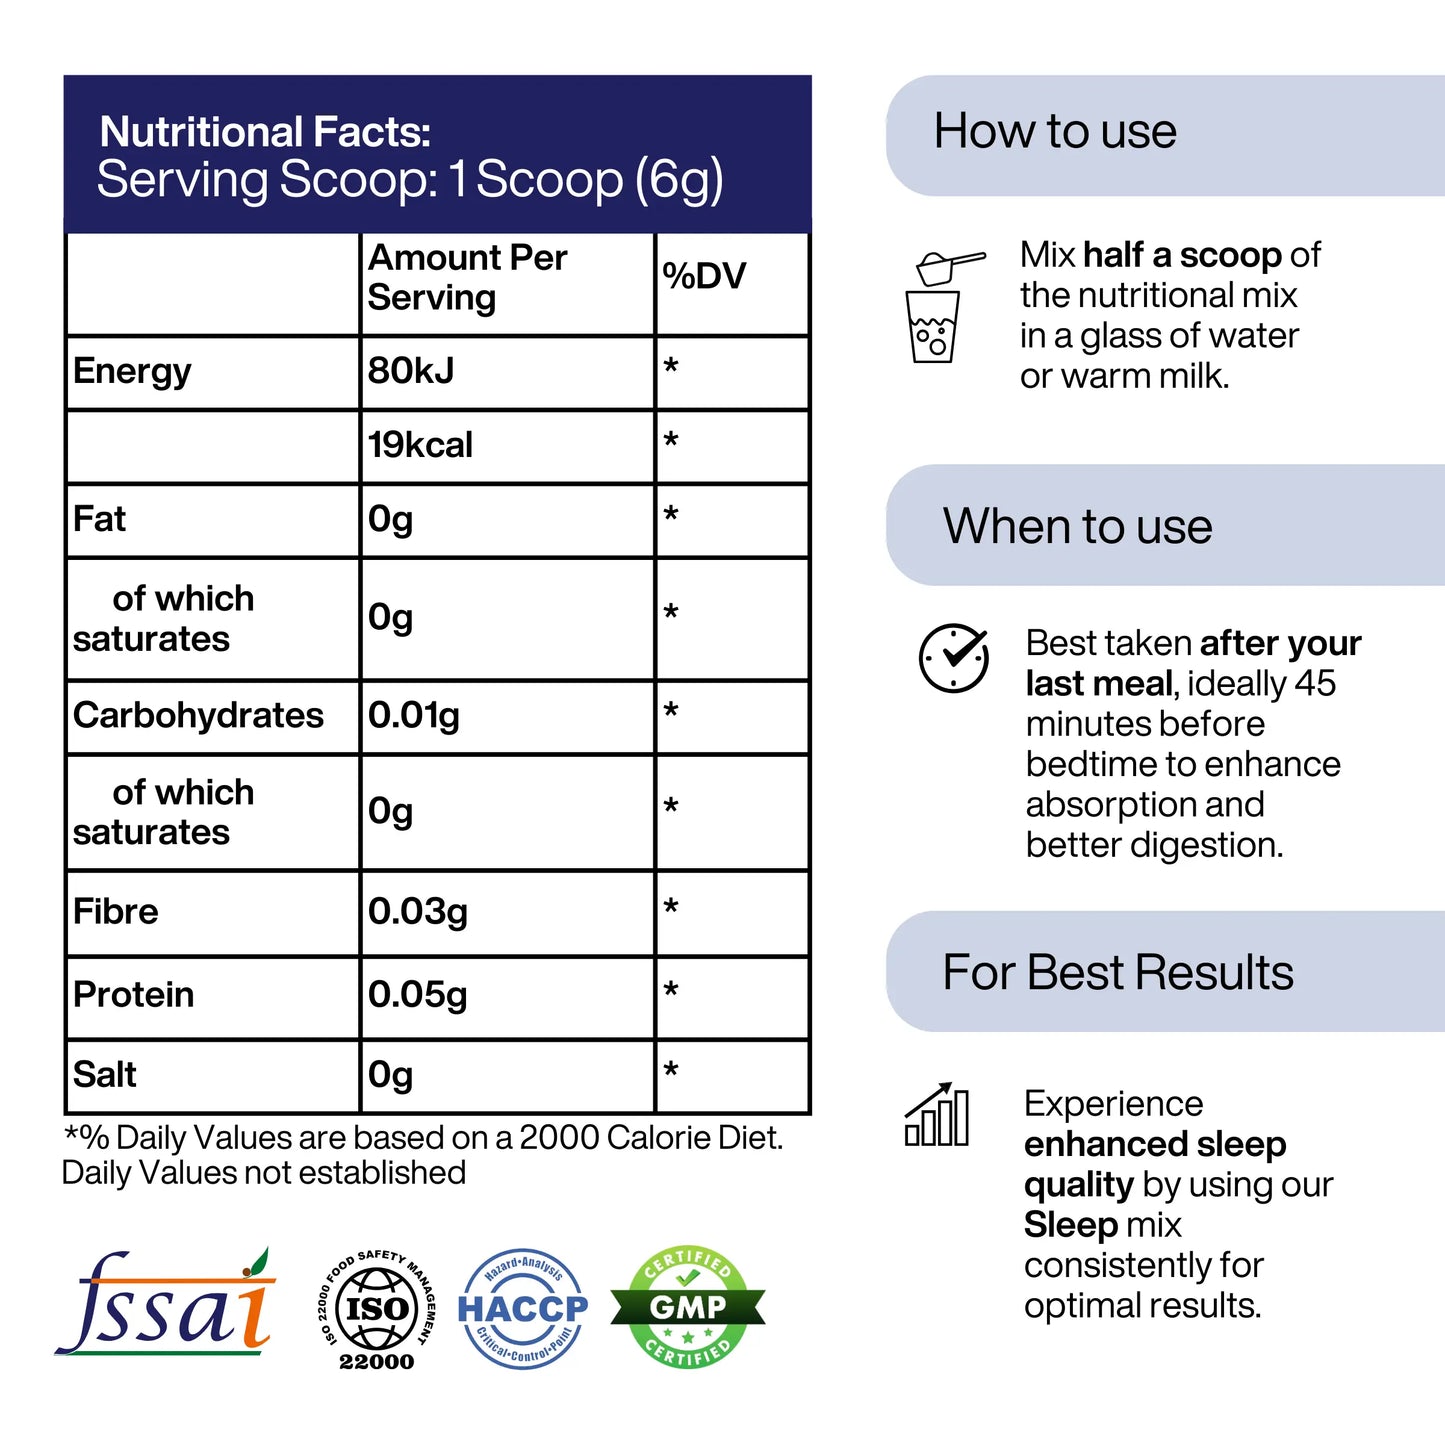 Picture of Puretive's Sleep Fix Nutrition Mix's Nutritional Facts, How to use, When to use & How to get the Best Resuts. Also Certifications like FSSAI, ISO, HACCP & GMP are mentioned.